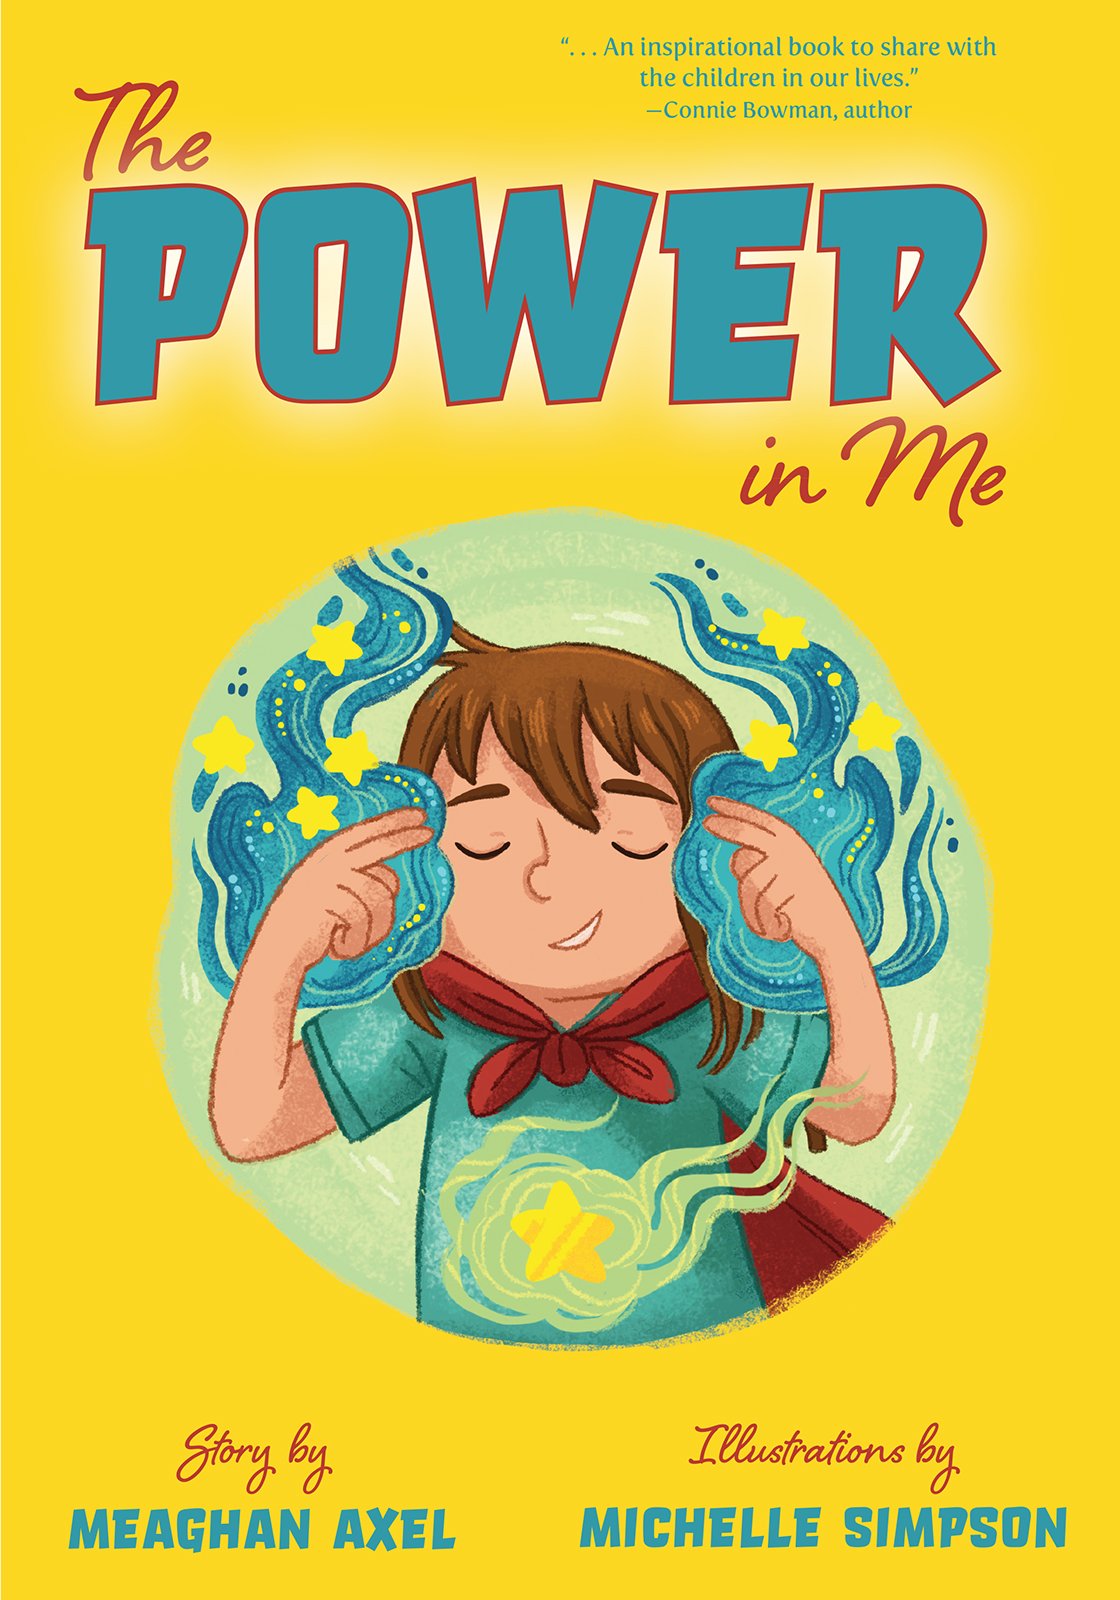 FREE: The Power in Me by Meaghan Axel